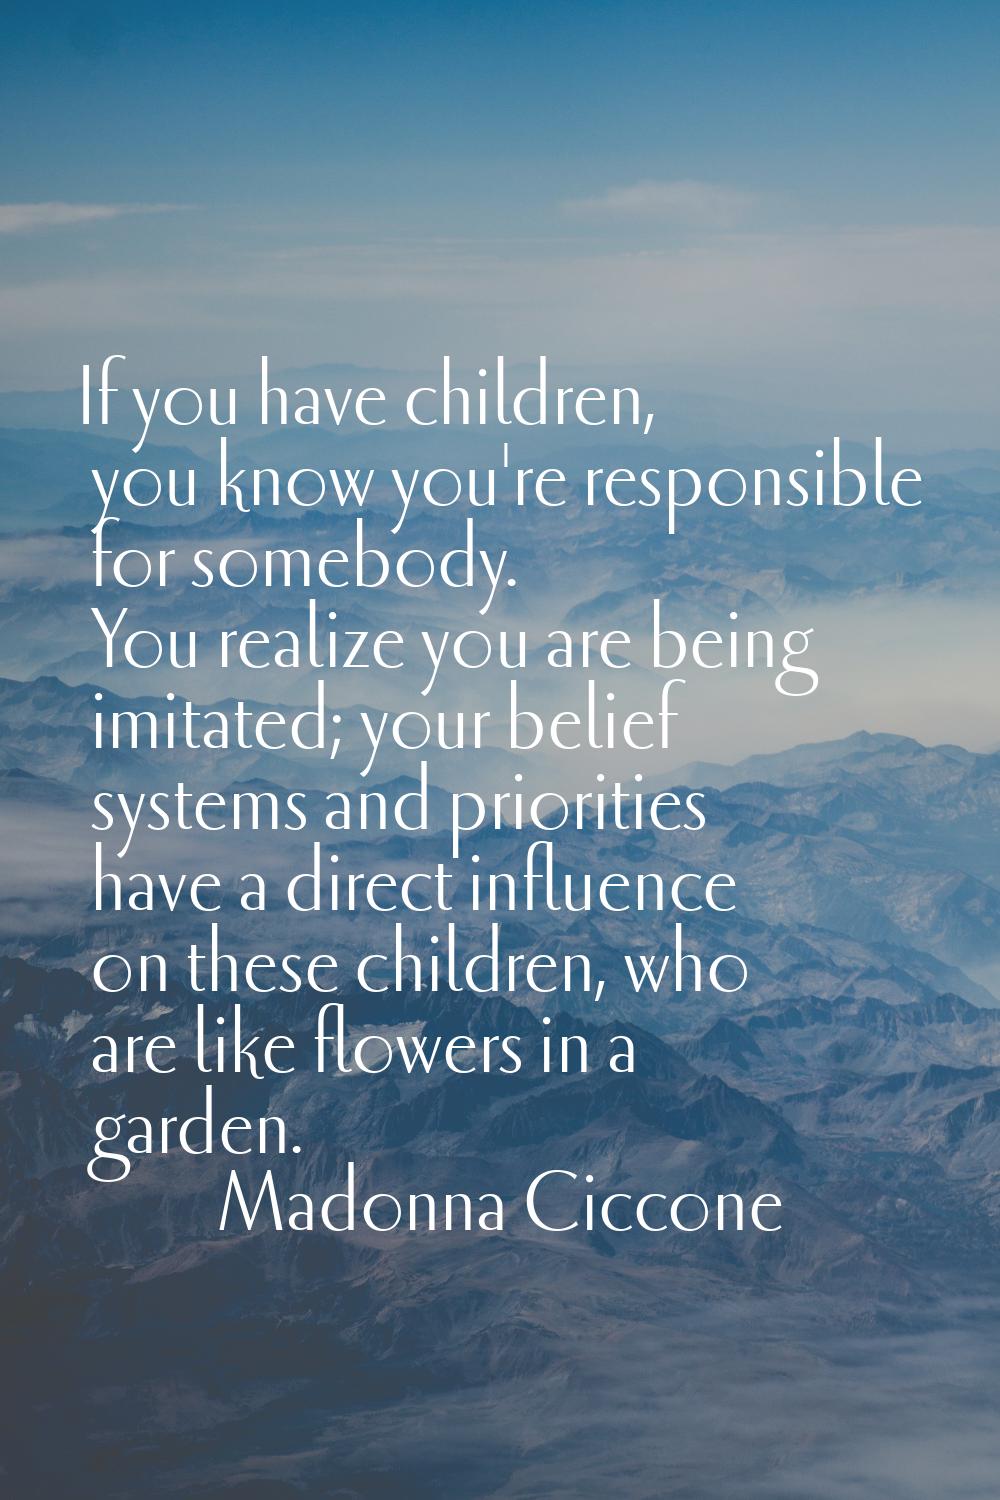 If you have children, you know you're responsible for somebody. You realize you are being imitated;